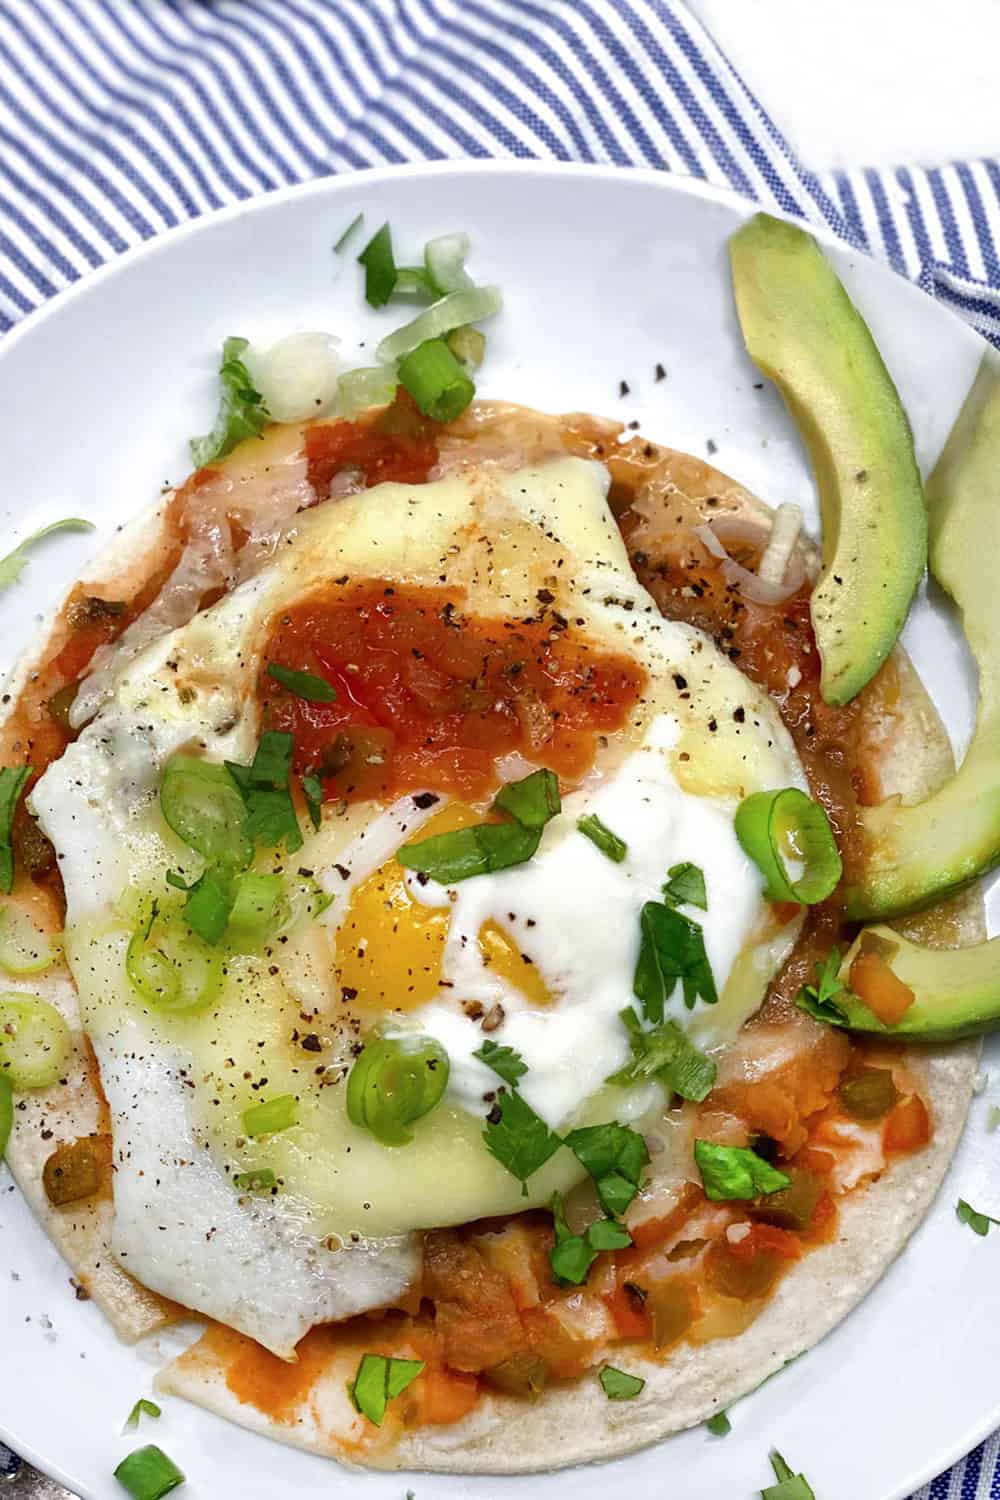 a white plate topped with huevos rancheros: a corn tortilla topped with refried beans, a gried egg, salsa, melted cheese, chopped scallions, a dollop of sour cream, and three slices of avocado.